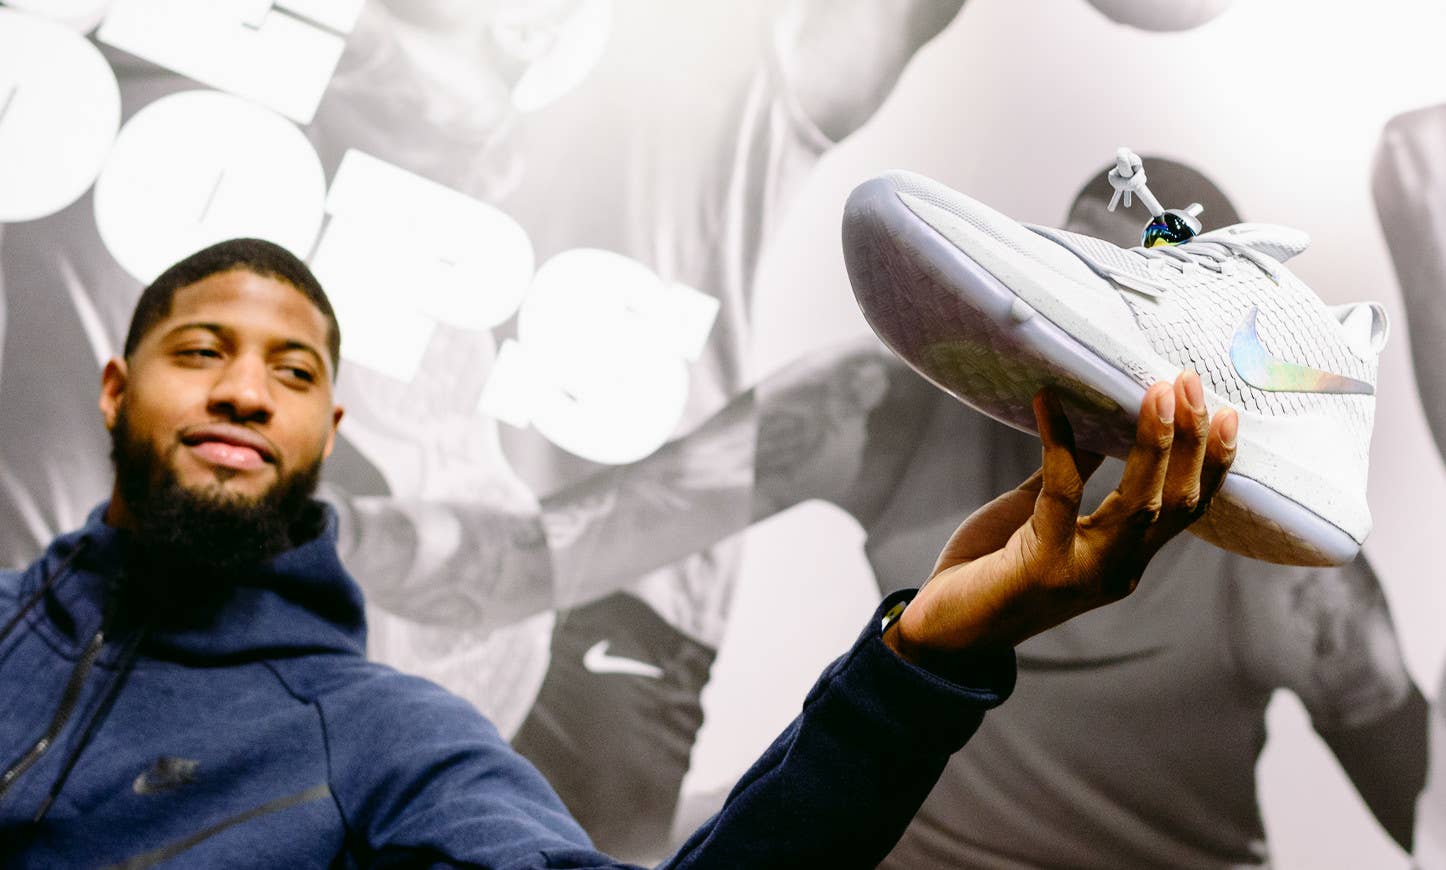 The Nike PG 6 will be the last signature sneaker model for Paul